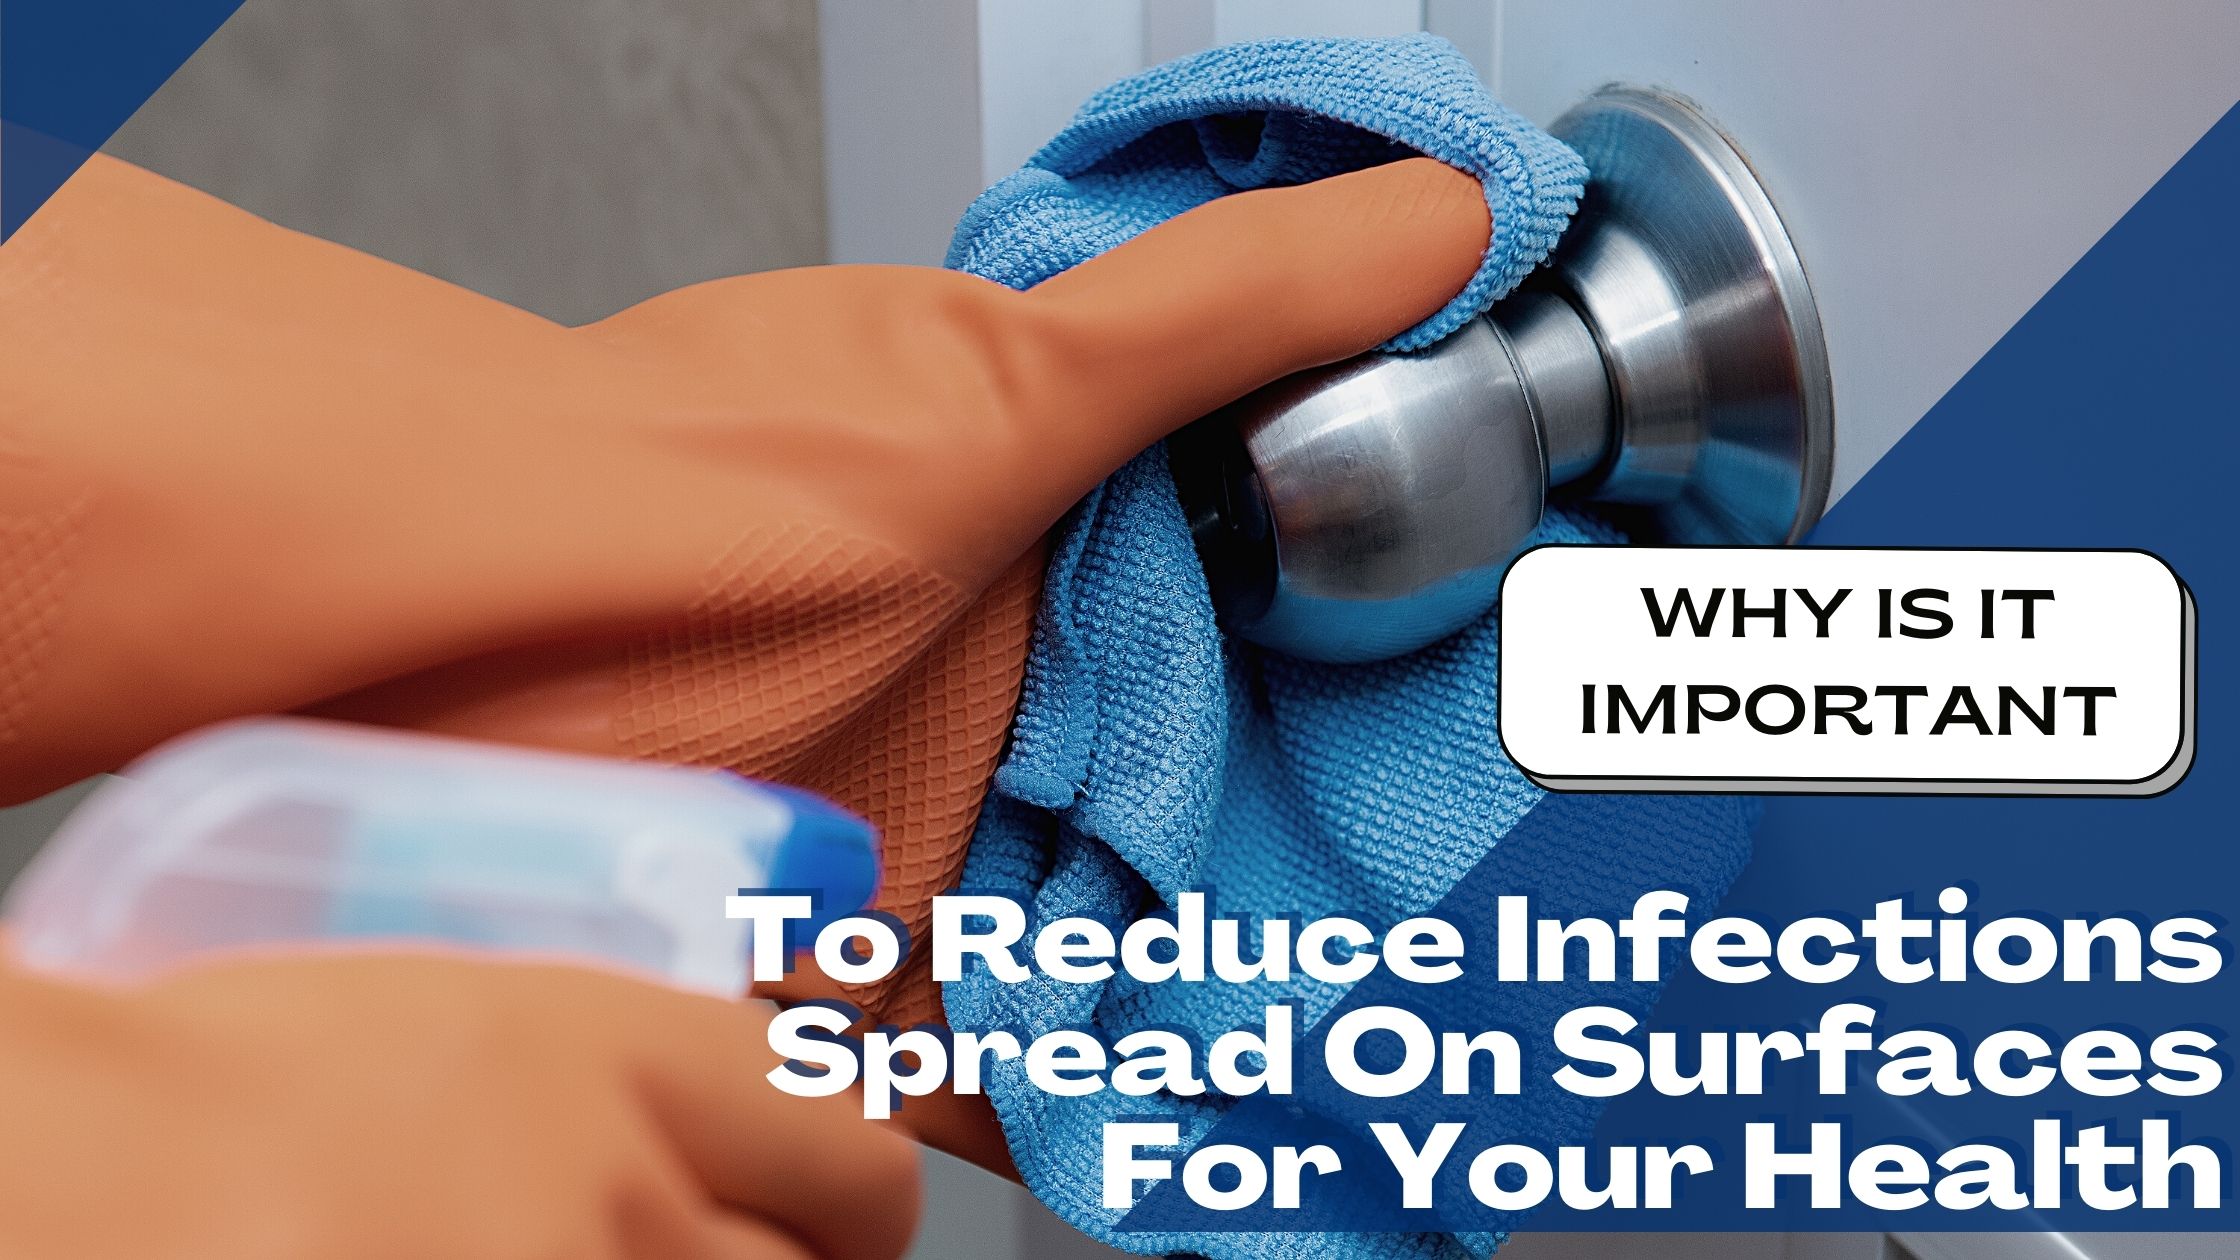 Reduce Infections Spread on Surfaces for Your Health